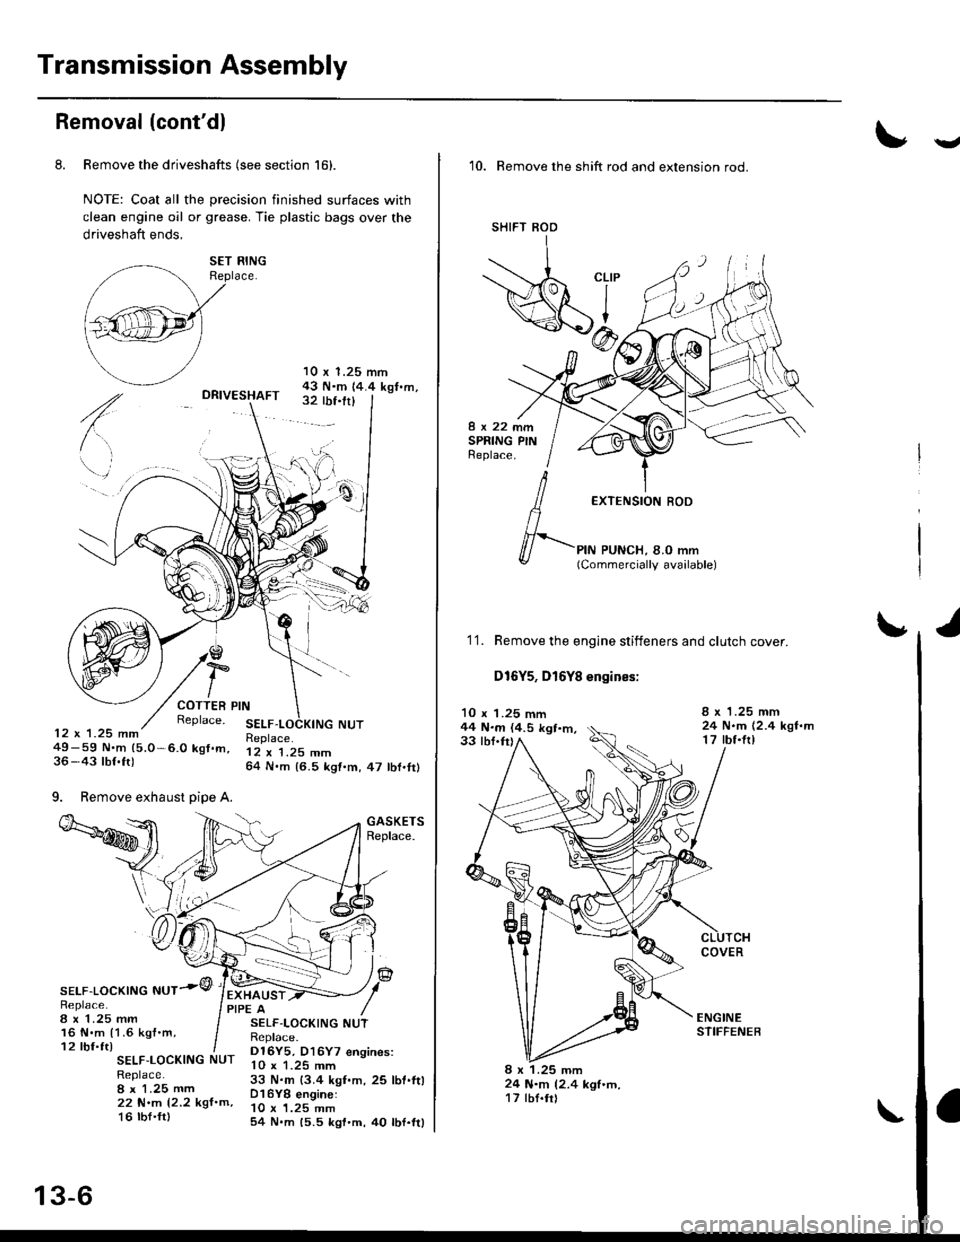 HONDA CIVIC 1999 6.G Workshop Manual Transmission Assembly
Removal (contdl
8. Remove the driveshafts (see section 161.
NOTE: Coat all the precision finished surfaces with
clean engine oil or grease. Tie plastic bags over the
driveshaft 